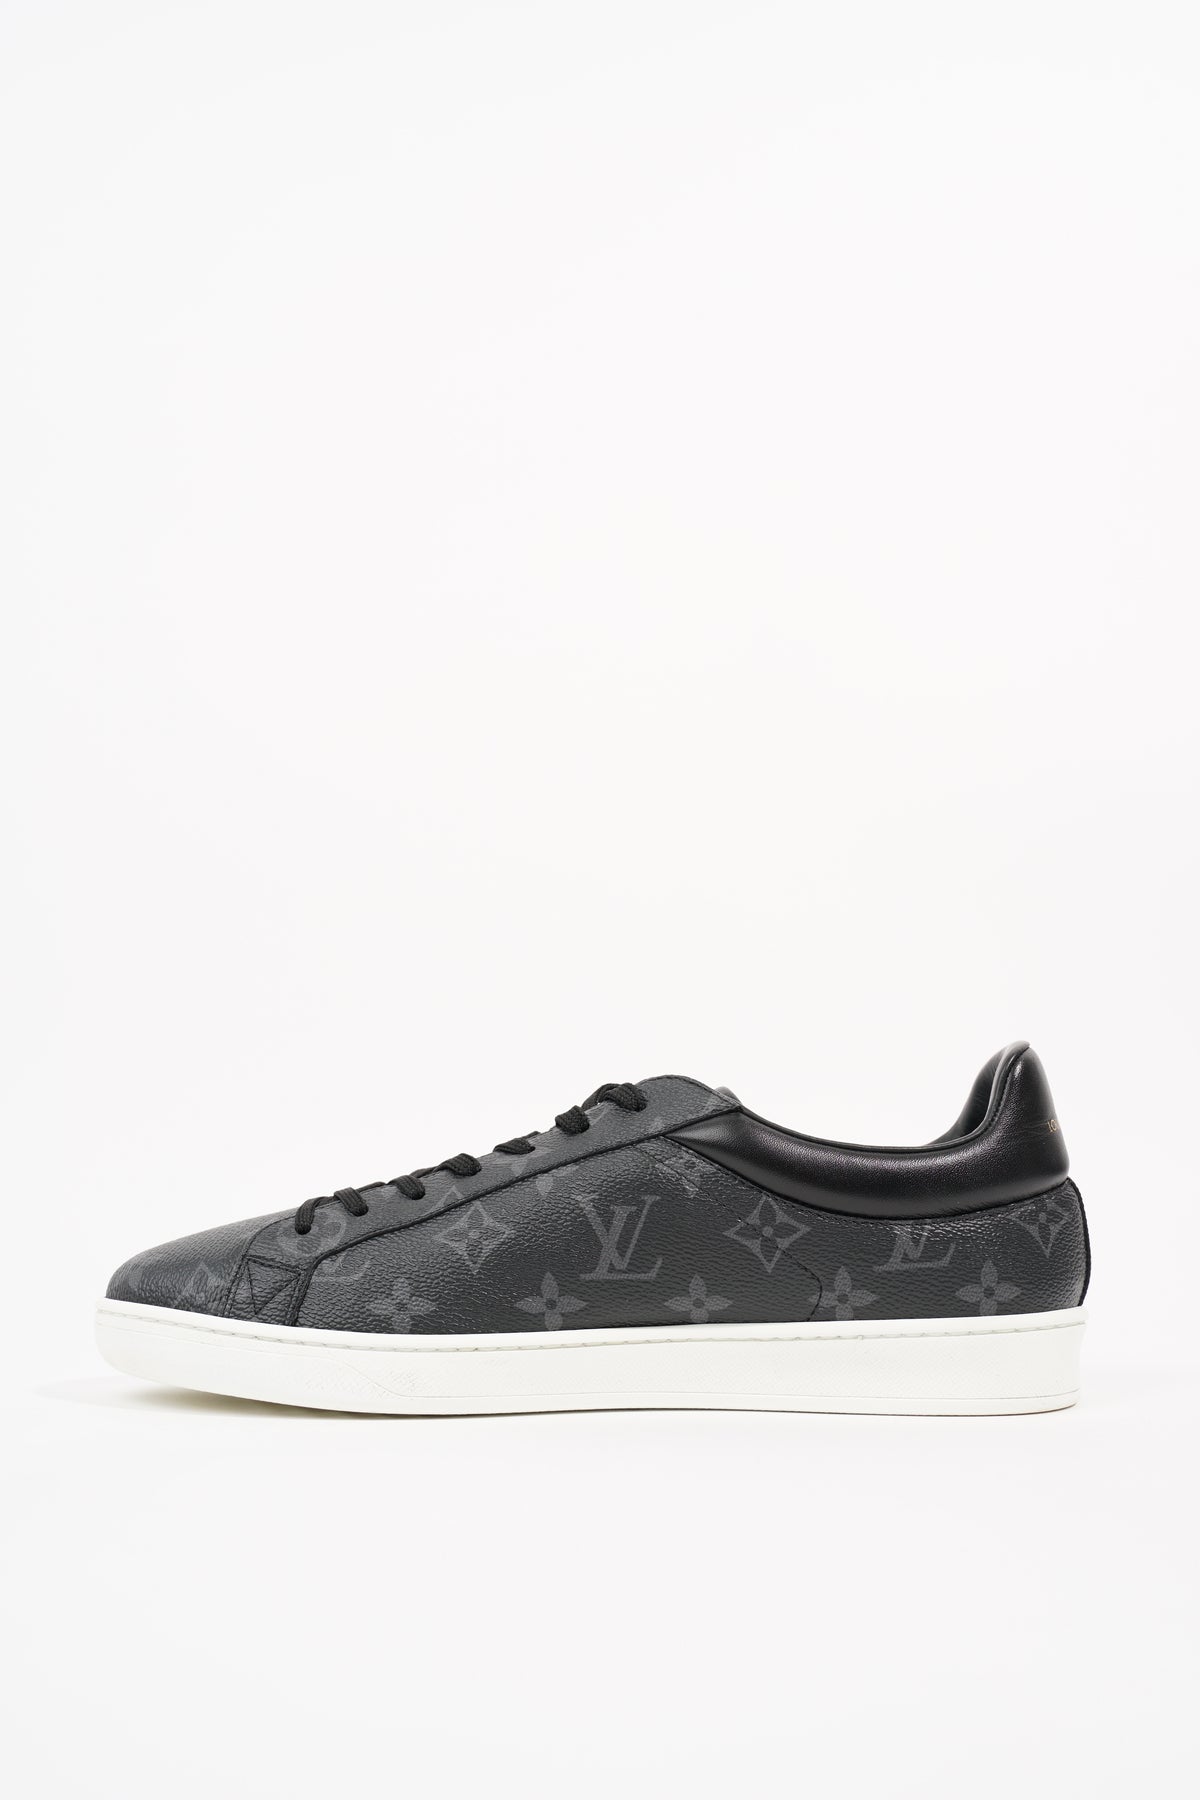 Louis Vuitton Luxembourg Black Sneaker Shoes Men 9 New for Sale in